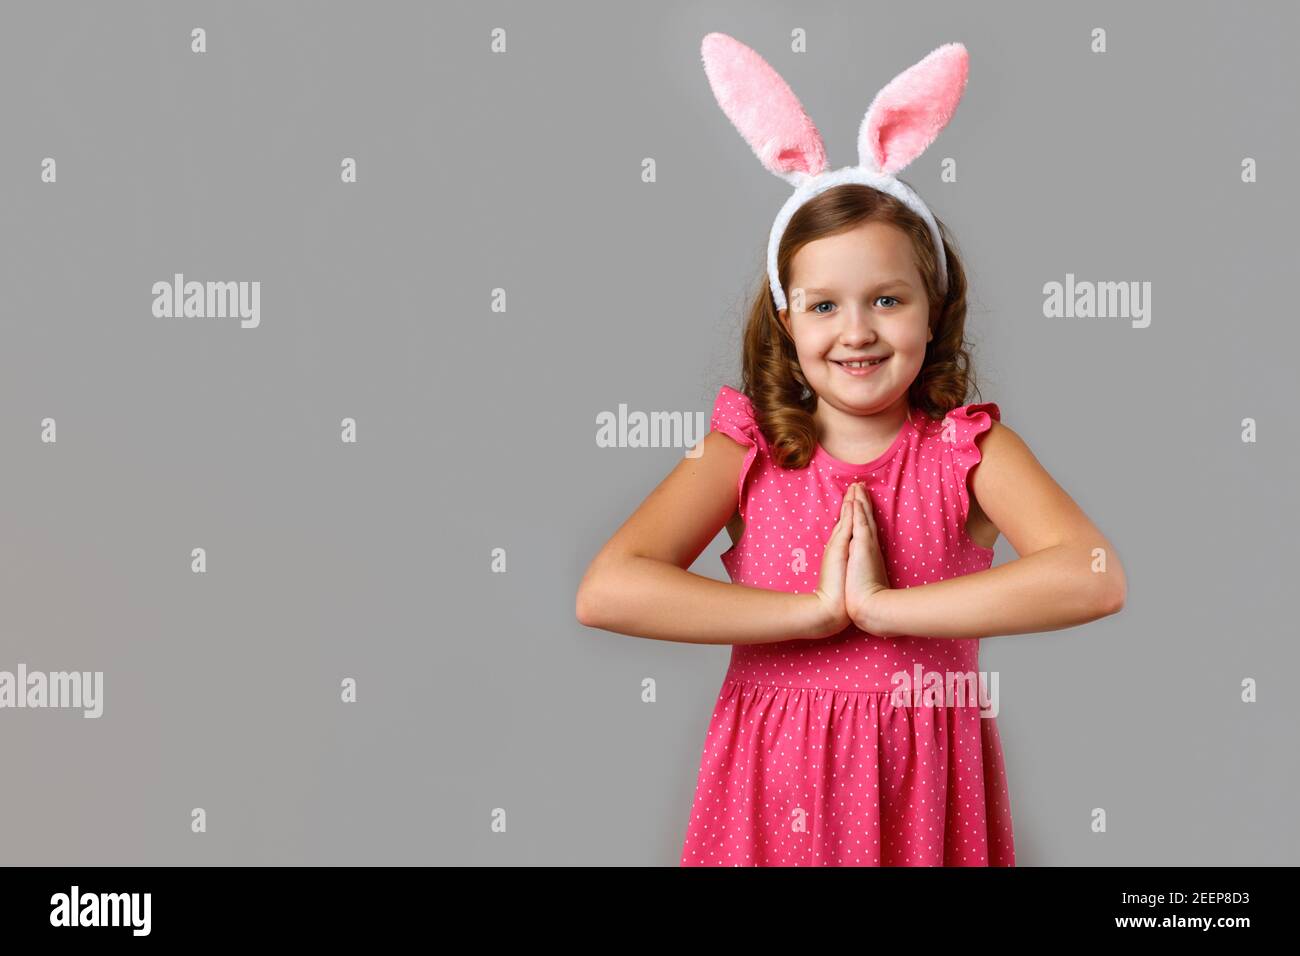 Happy easter. Smiling little girl in a pink dress with polka dots on a gray background. The child in the rabbit ears folded her hands for prayer. Stock Photo